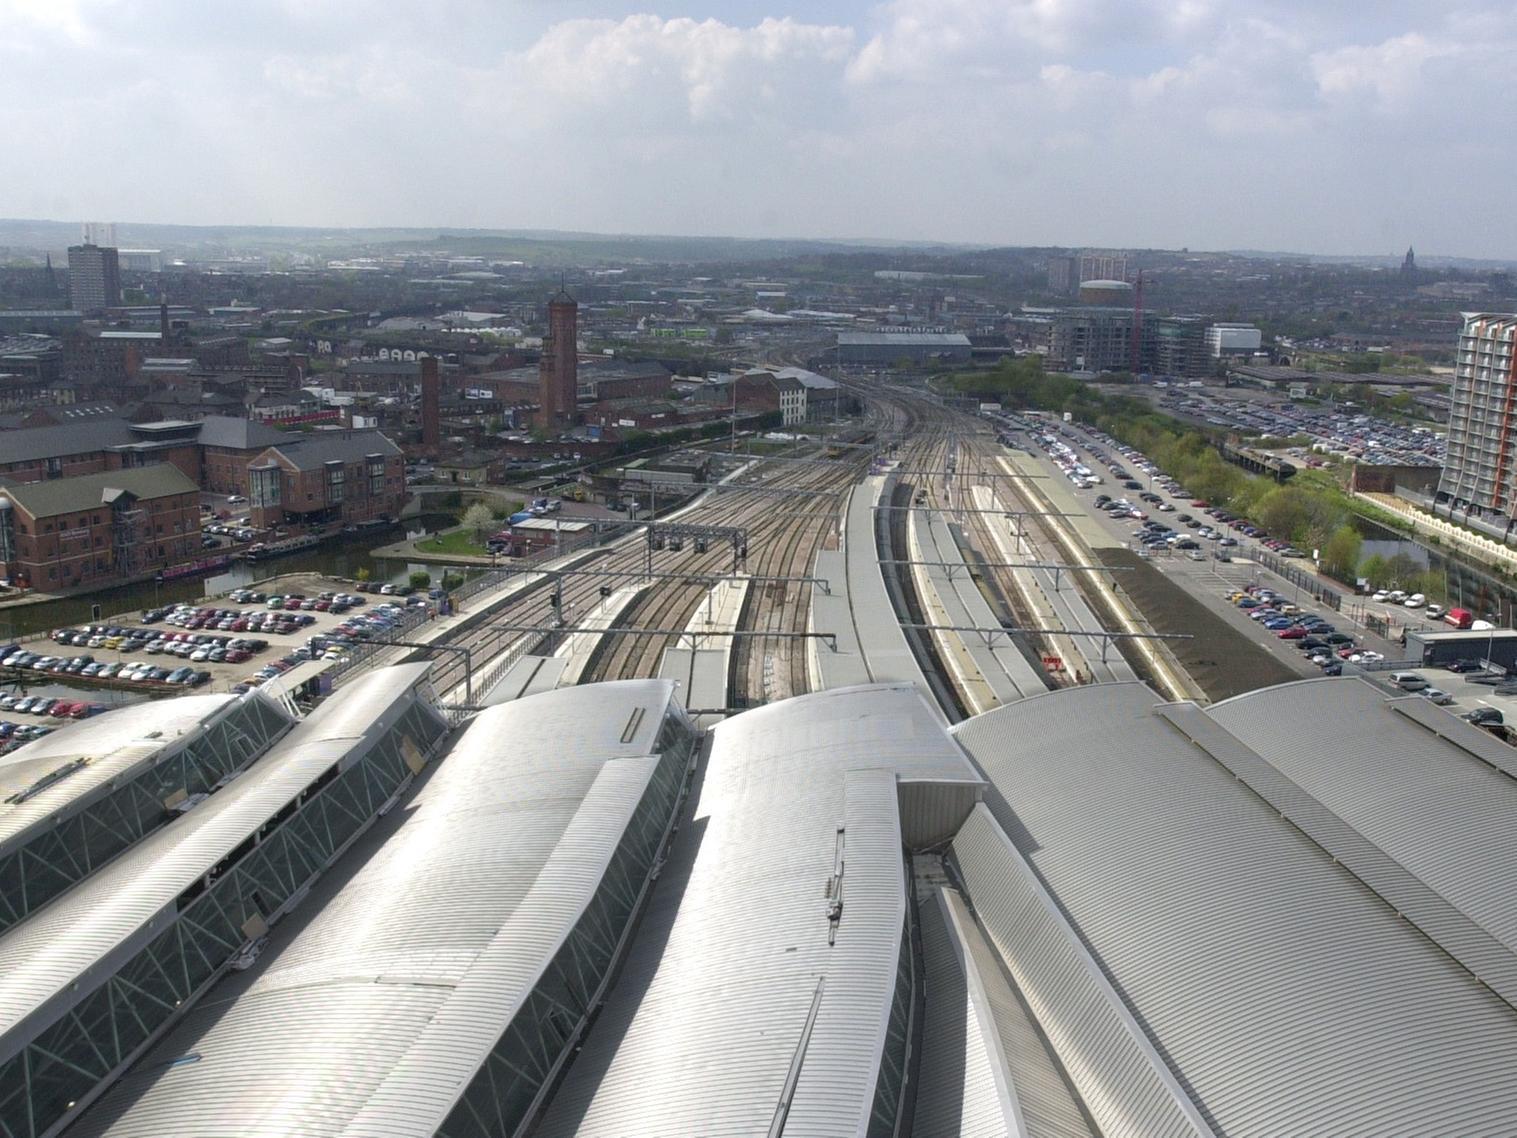 A major rebuilding project, branded as Leeds 1st. was completed at Leeds City Station. The work included an expansion of platforms from 12 to 17.